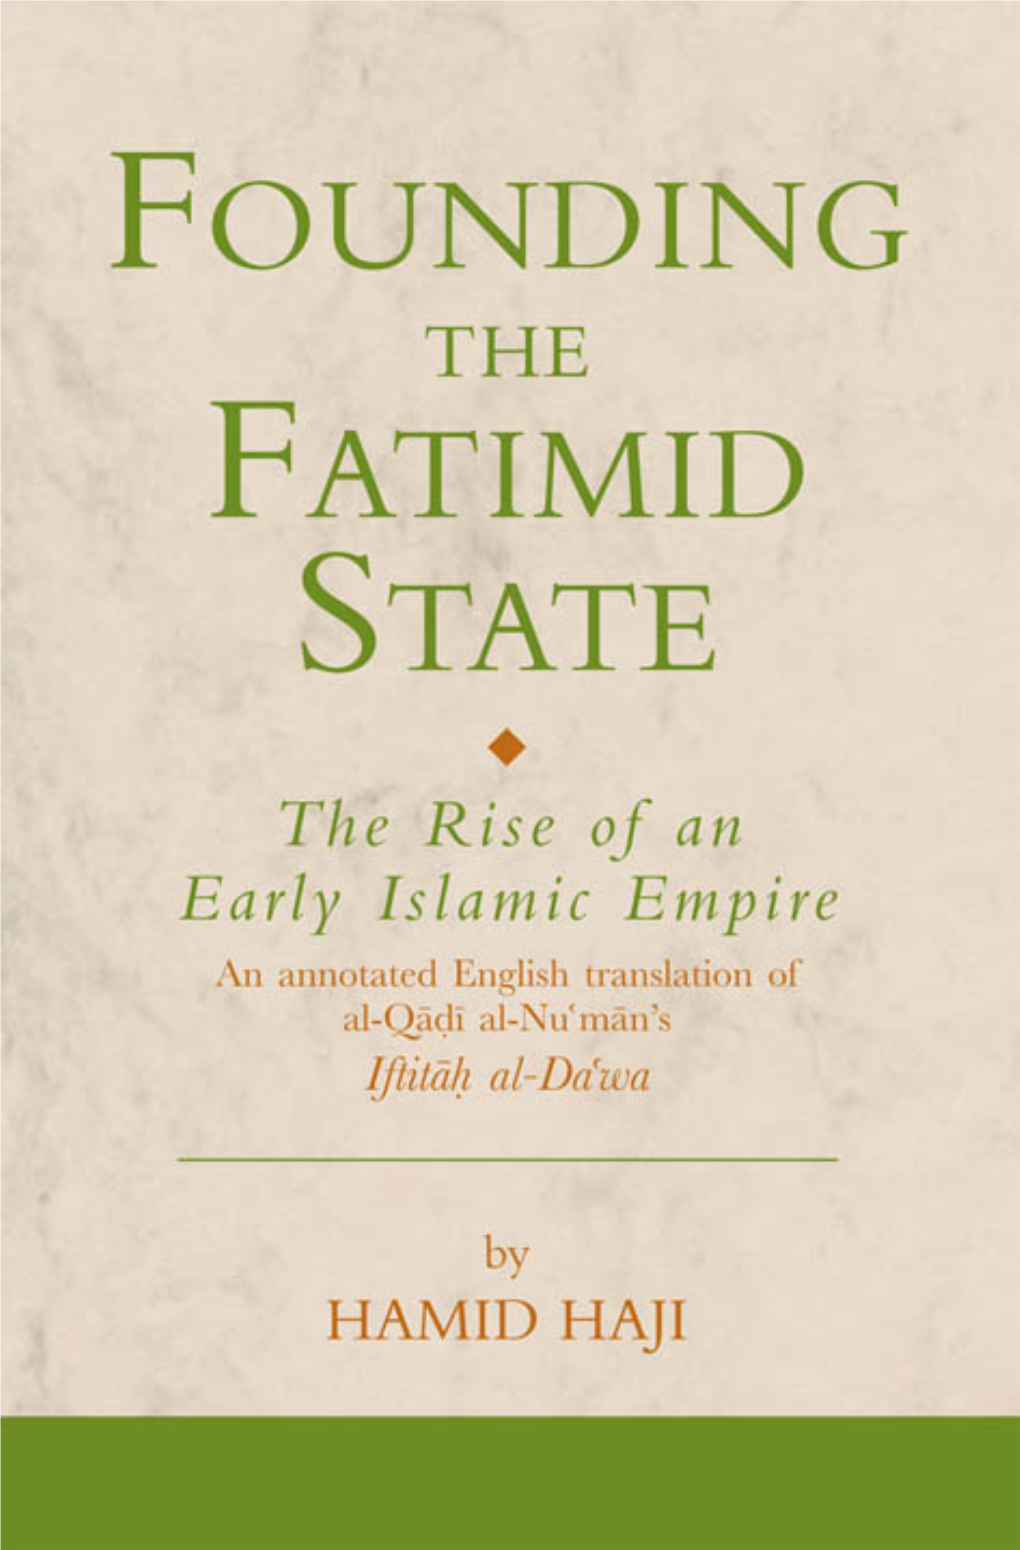 Founding the Fatimid State: the Rise of an Early Islamic Empire